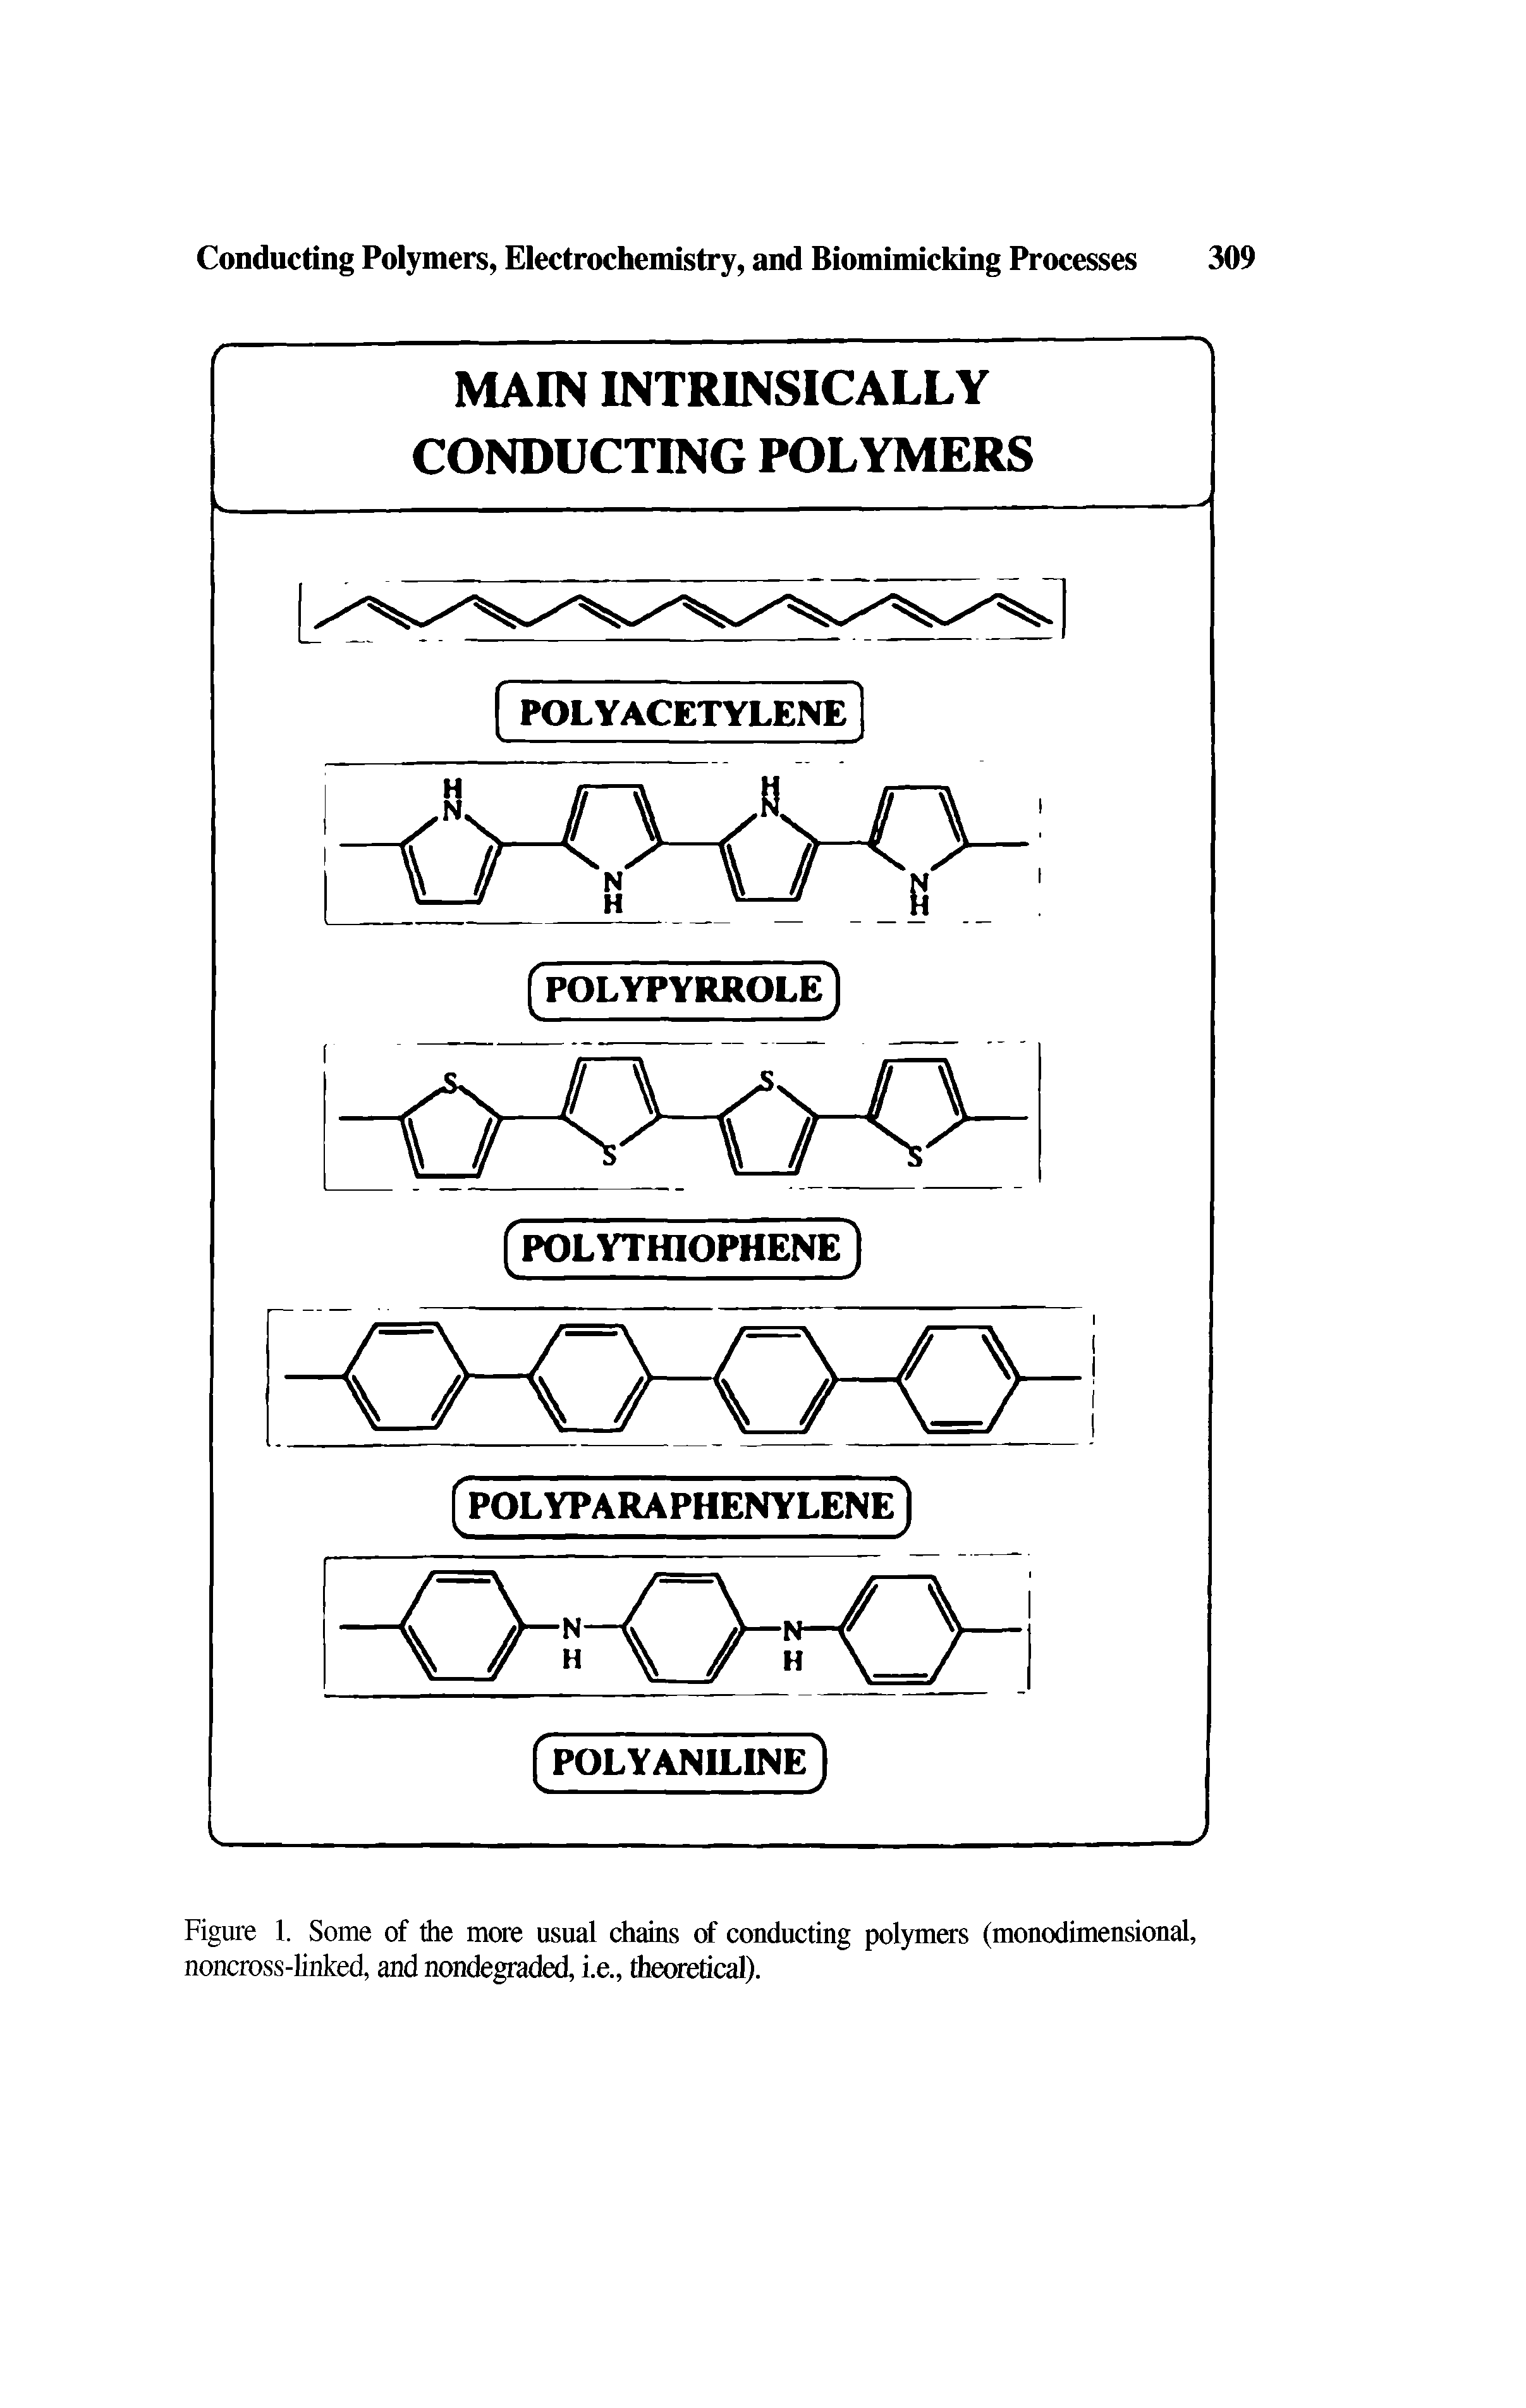 Figure 1. Some of the more usual chains of conducting polymers (monodimensional, noncross-linked, and nondegraded, i.e., theoretical).